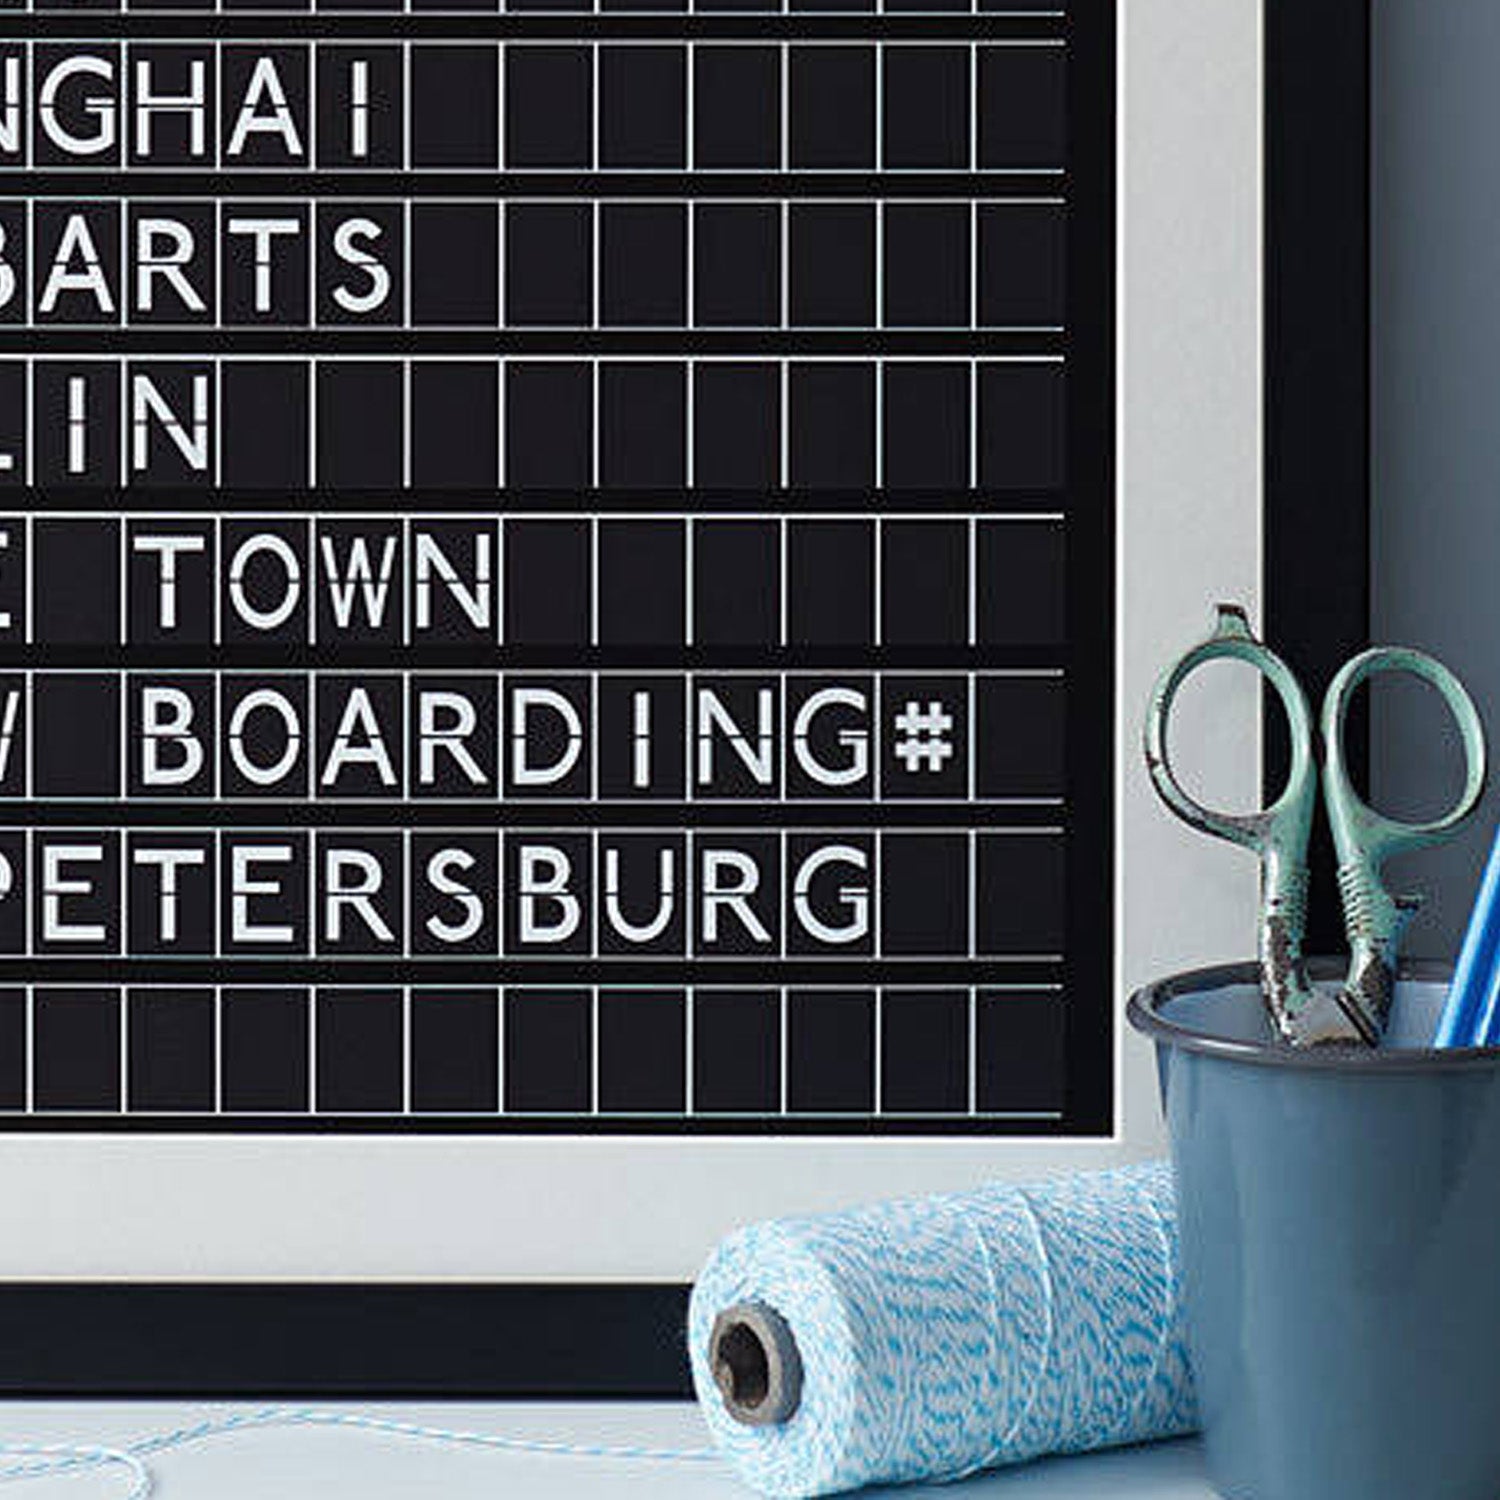 close up of black and white print in the style of an airport departures board